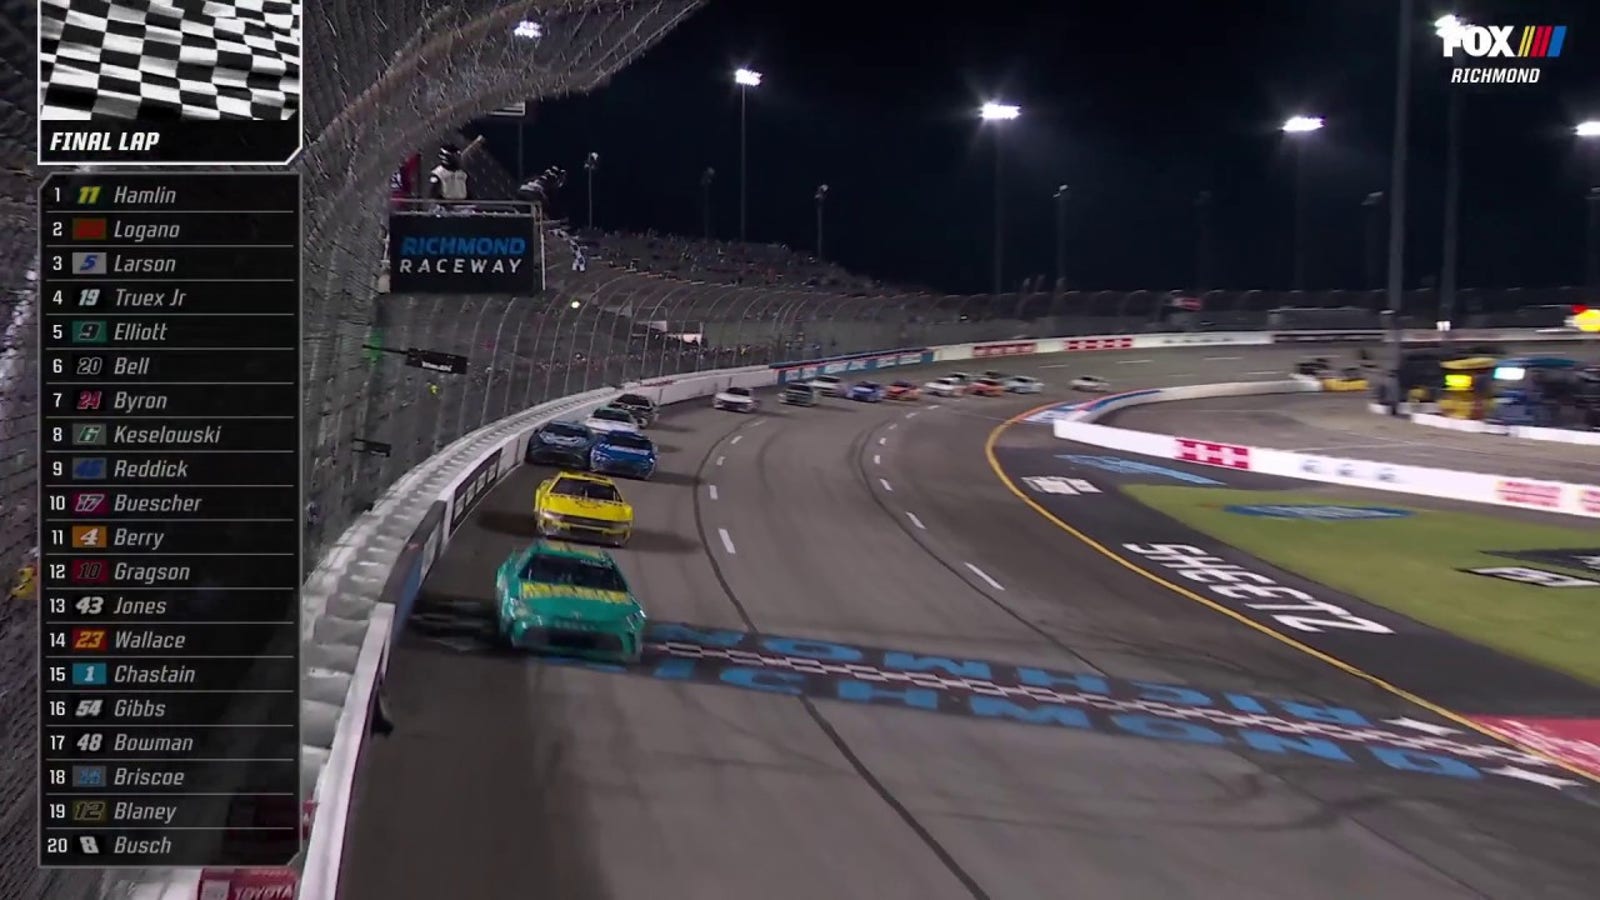 FINAL LAPS: Denny Hamlin wins the Toyota Owners 400 at Richmond after eventful finish